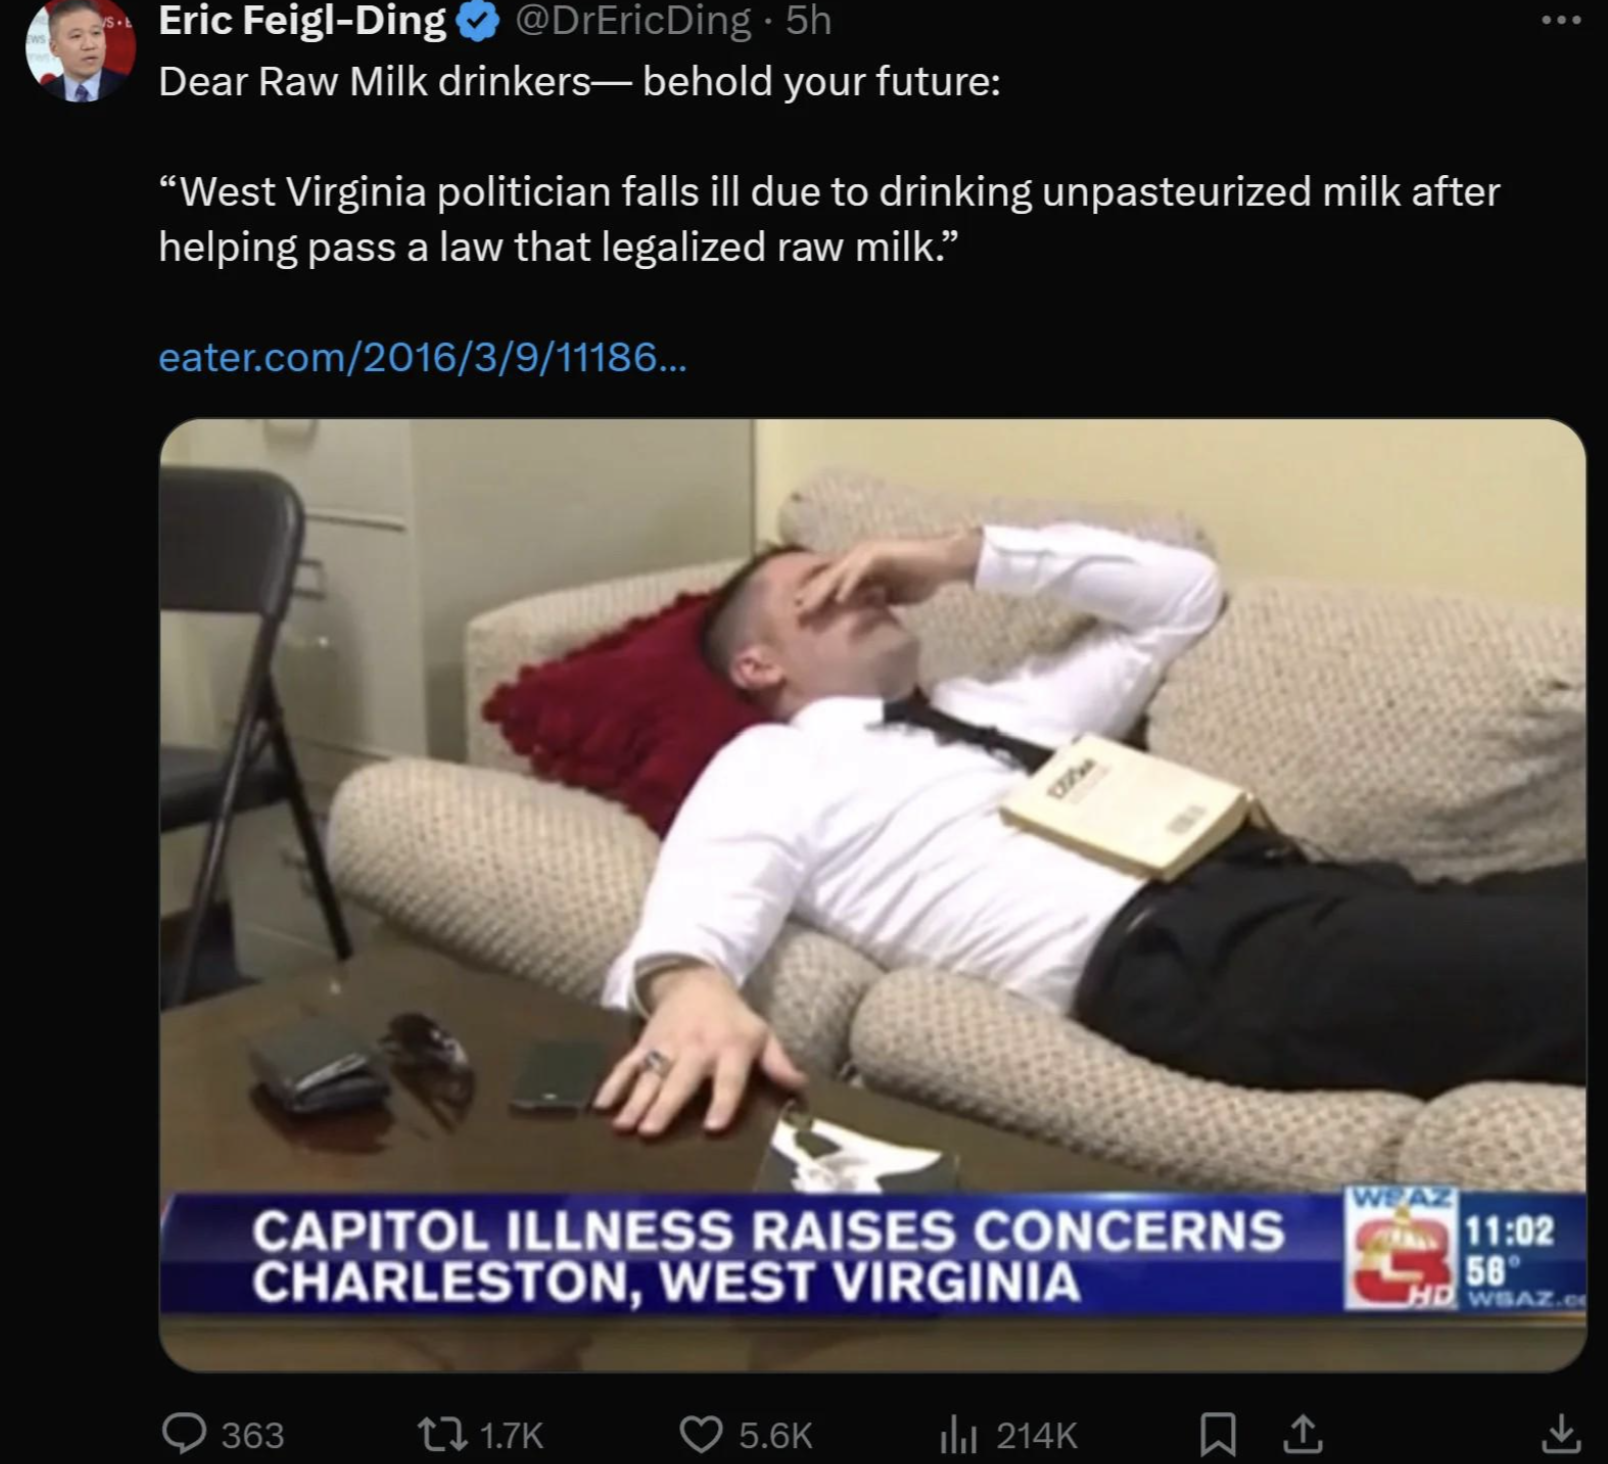 instant karma funny memes - Eric FeiglDing 5h Dear Raw Milk drinkersbehold your future "West Virginia politician falls ill due to drinking unpasteurized milk after helping pass a law that legalized raw milk." eater.com20163911186... Capitol Illness Raises